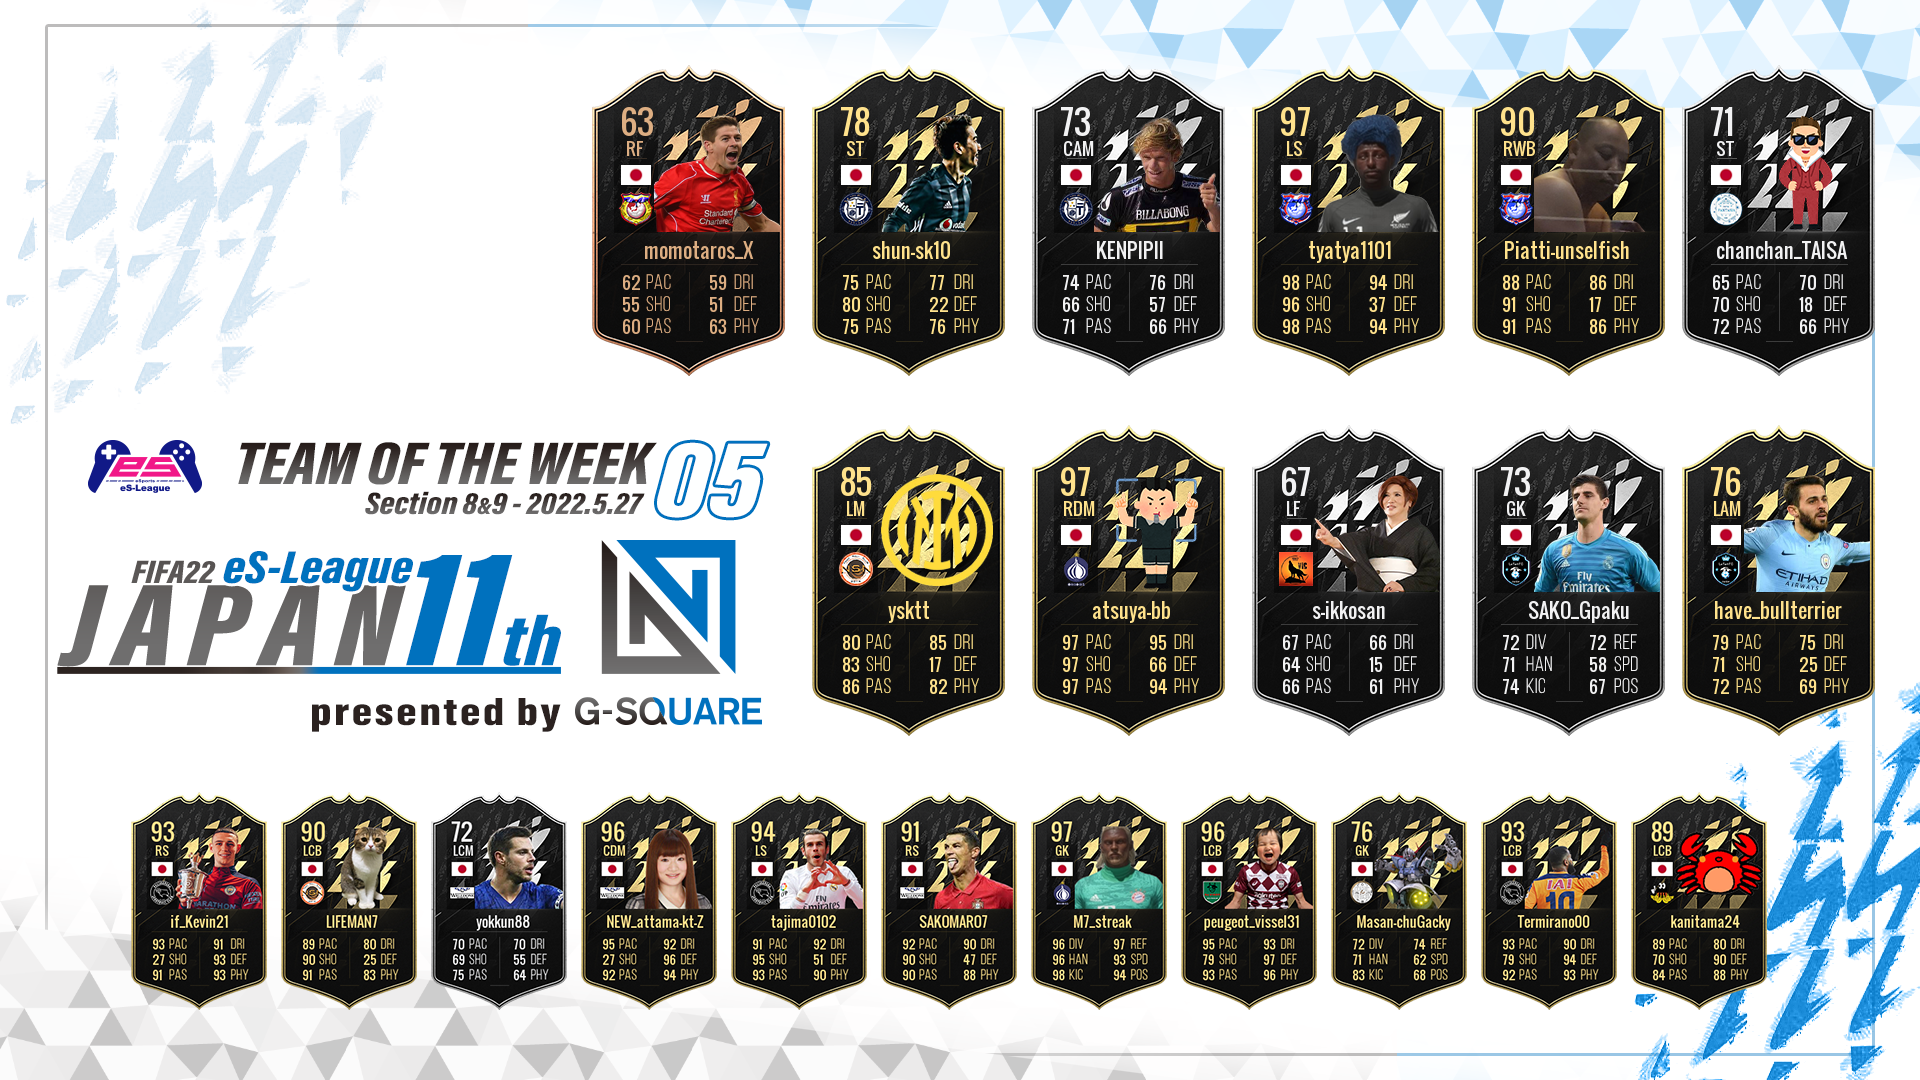 FIFA22 eS-League JAPAN 11th presented by G-SQUARE TOTW05